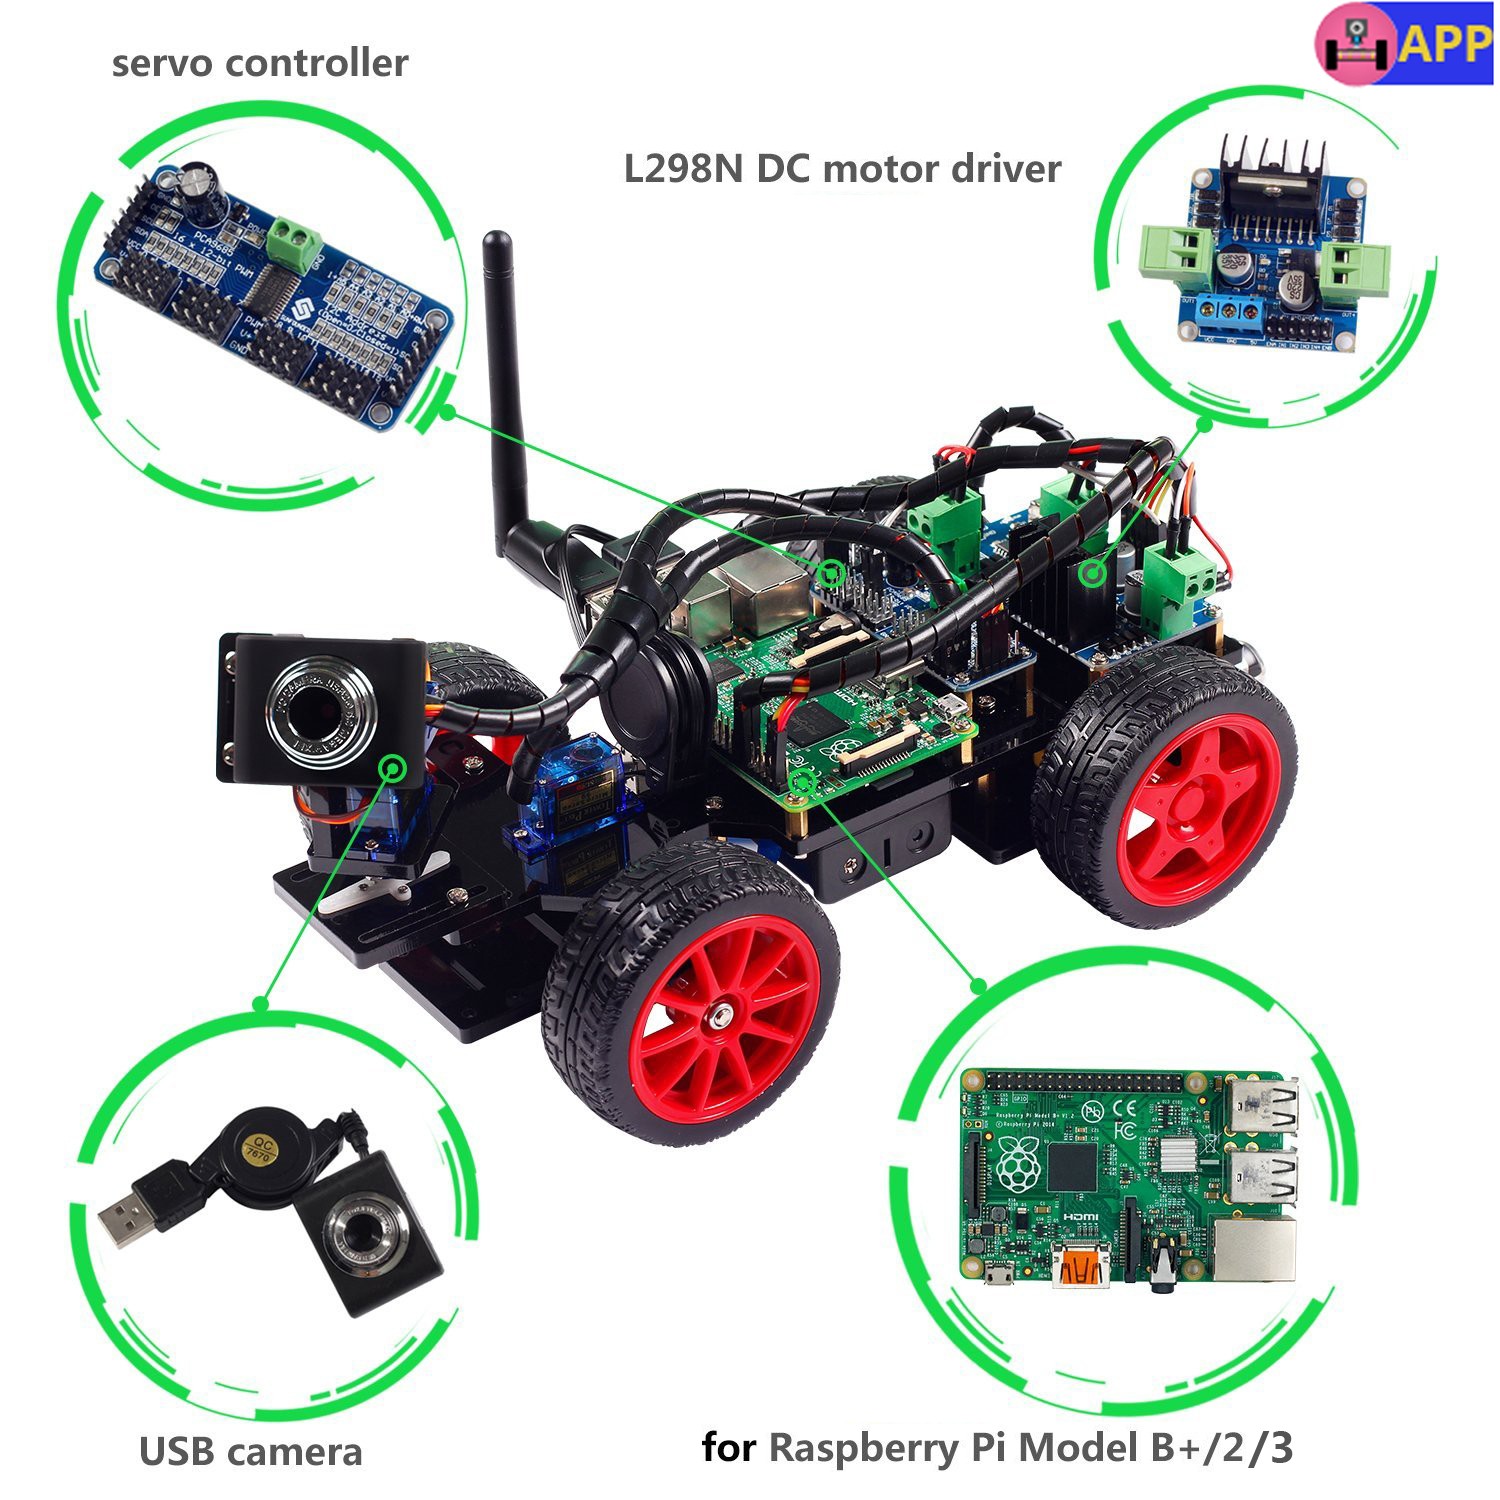 2 and RPi 1 Model B+ Compatible with RPi 3 Pi Not Included Smart Video Car Kit for Raspberry Pi with Android App 